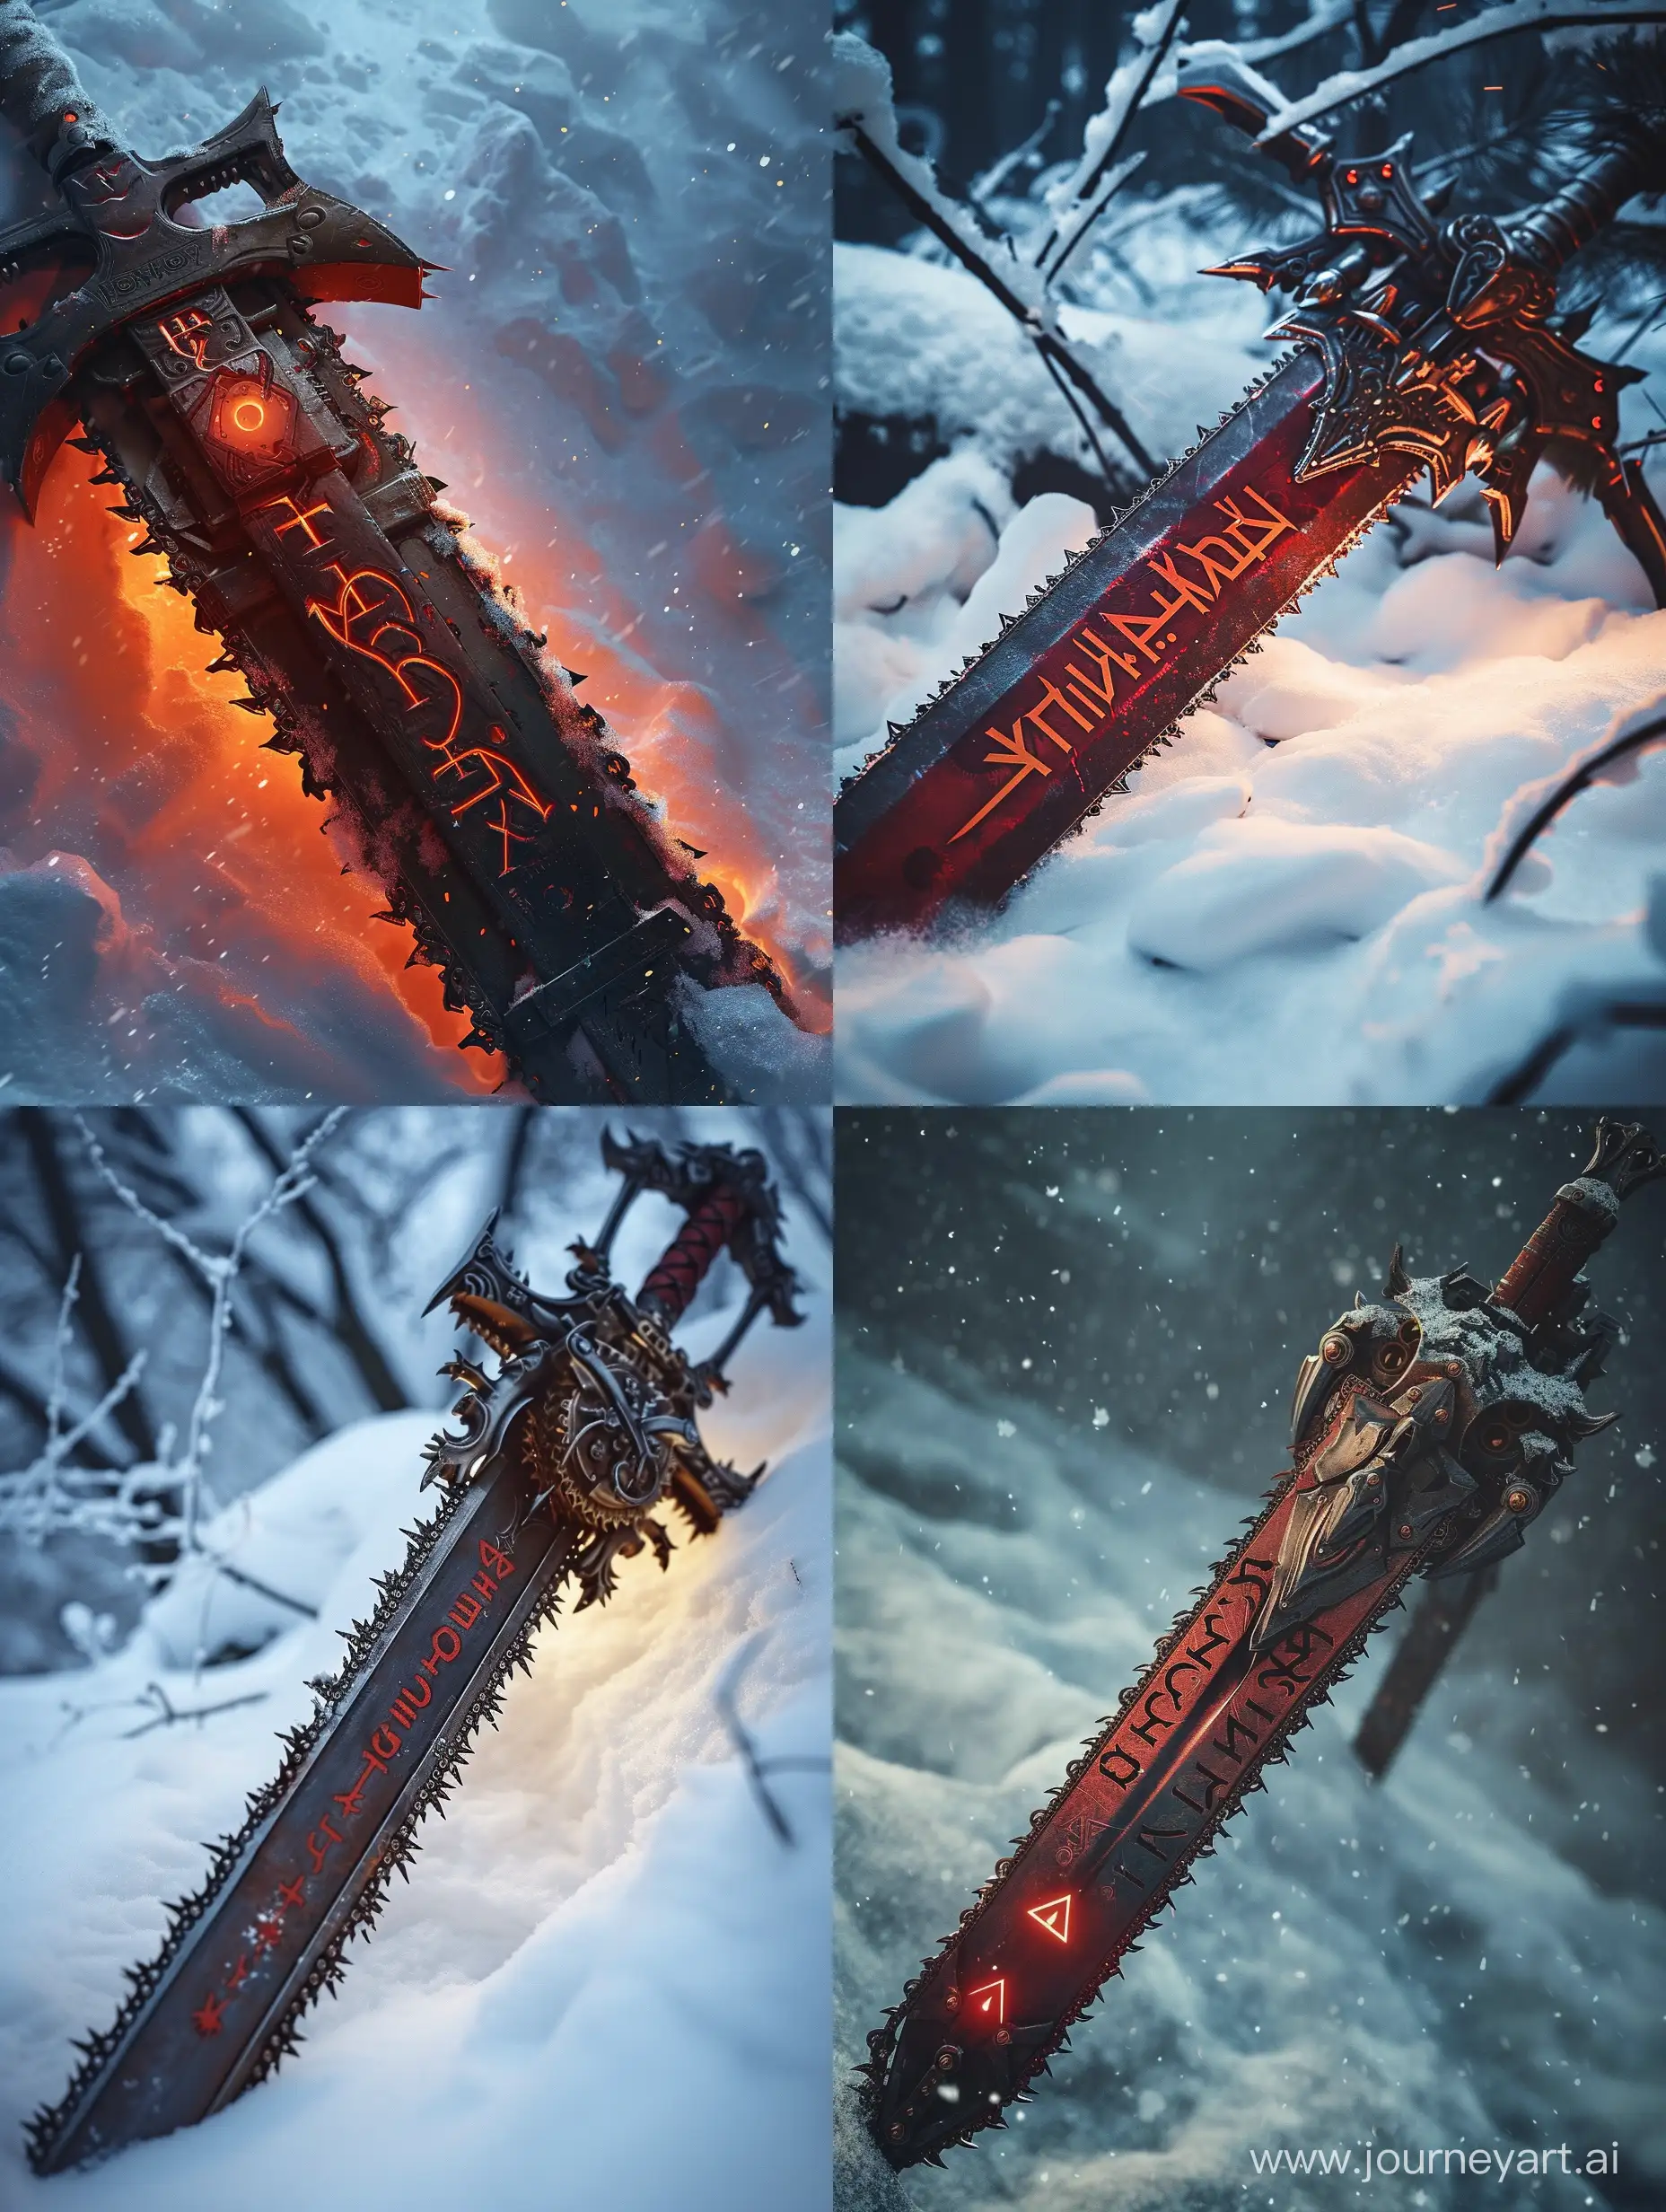 red queen sword with engine,with chainsaw blades,runic letters curving on it,intricate curving,snow,steampunk.incredible detail,warm light,terrifying.